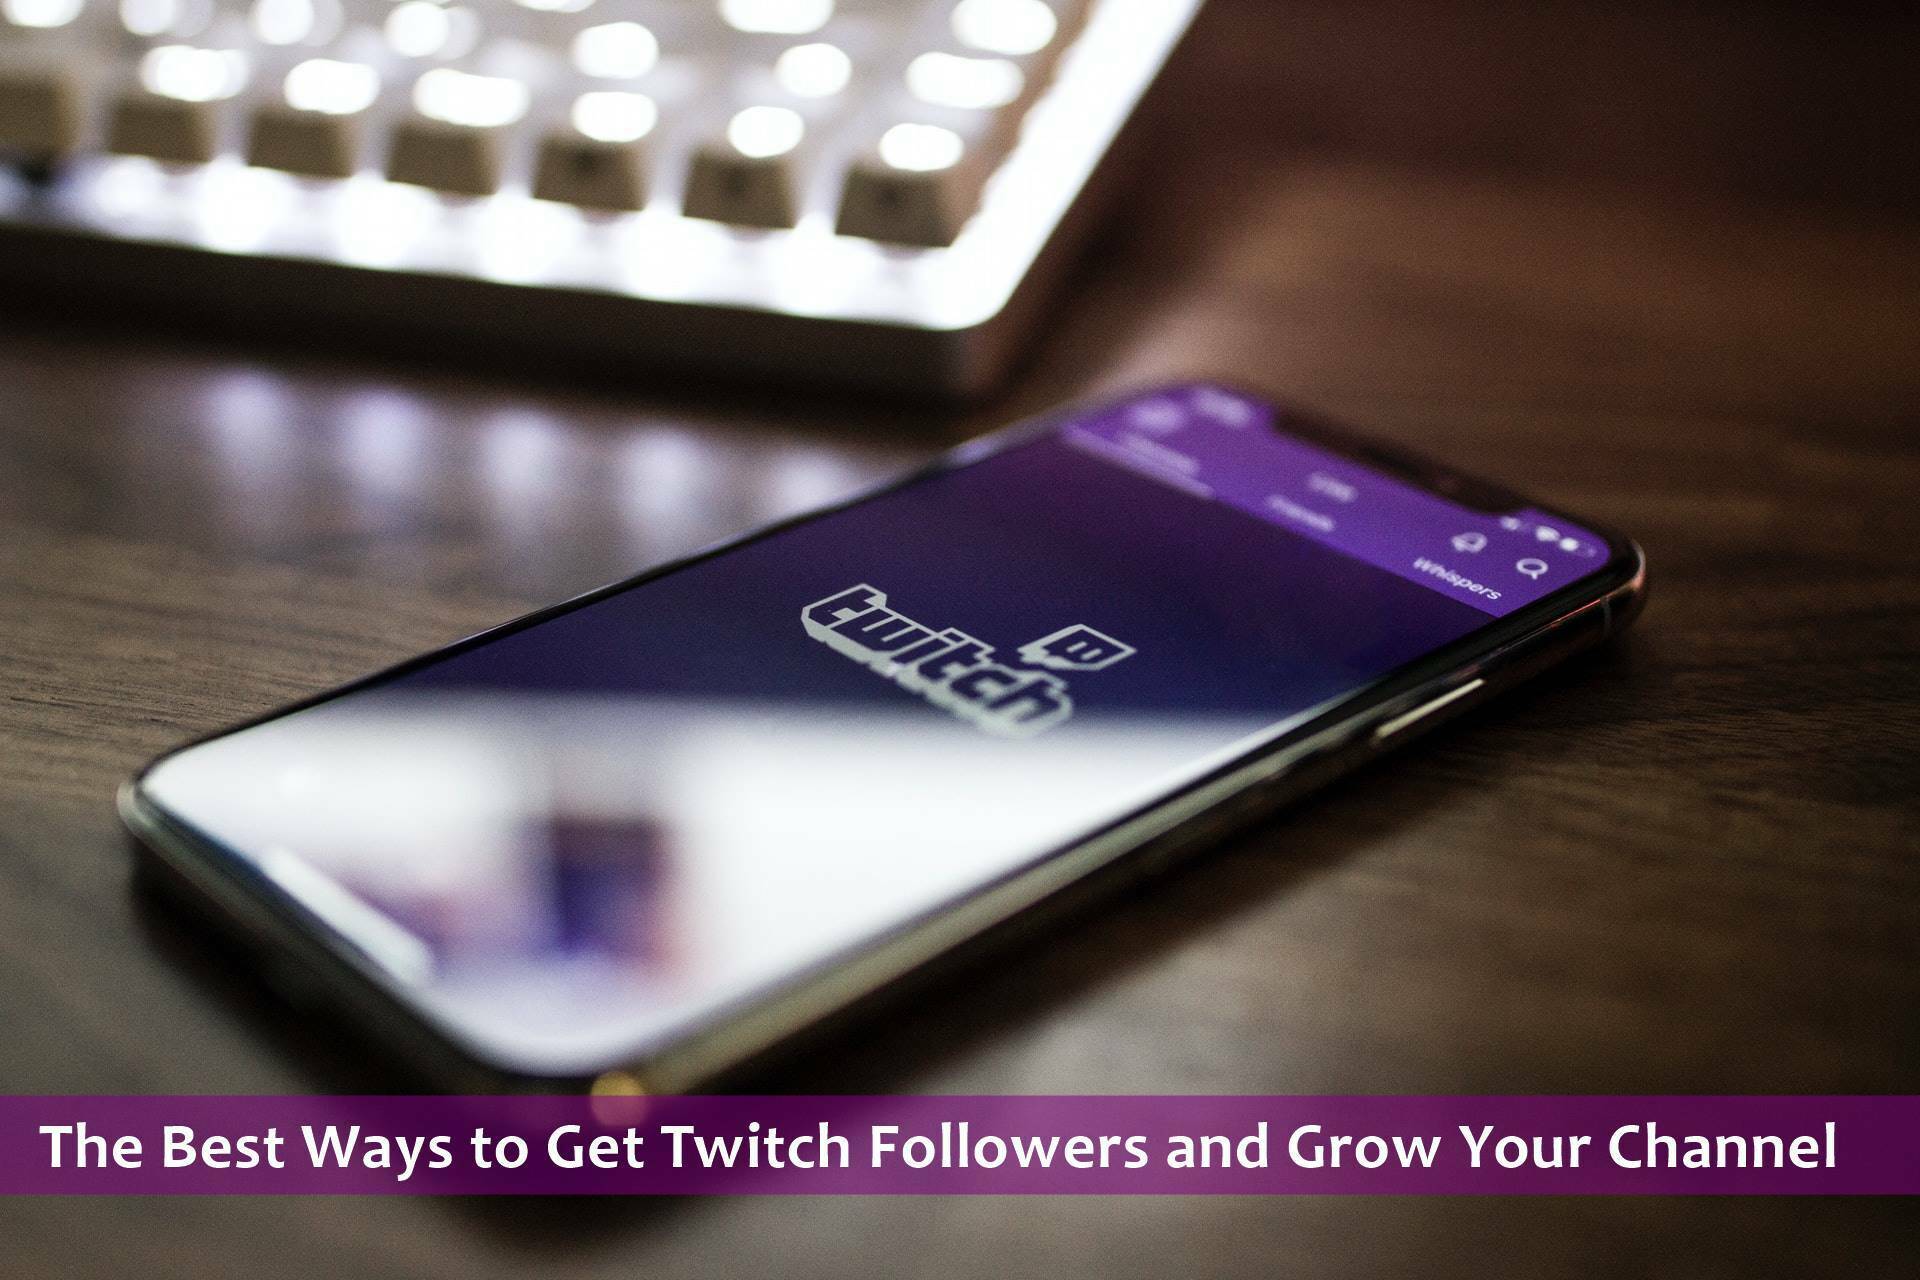 The Best Ways to Get Twitch Followers and Grow Your Channel